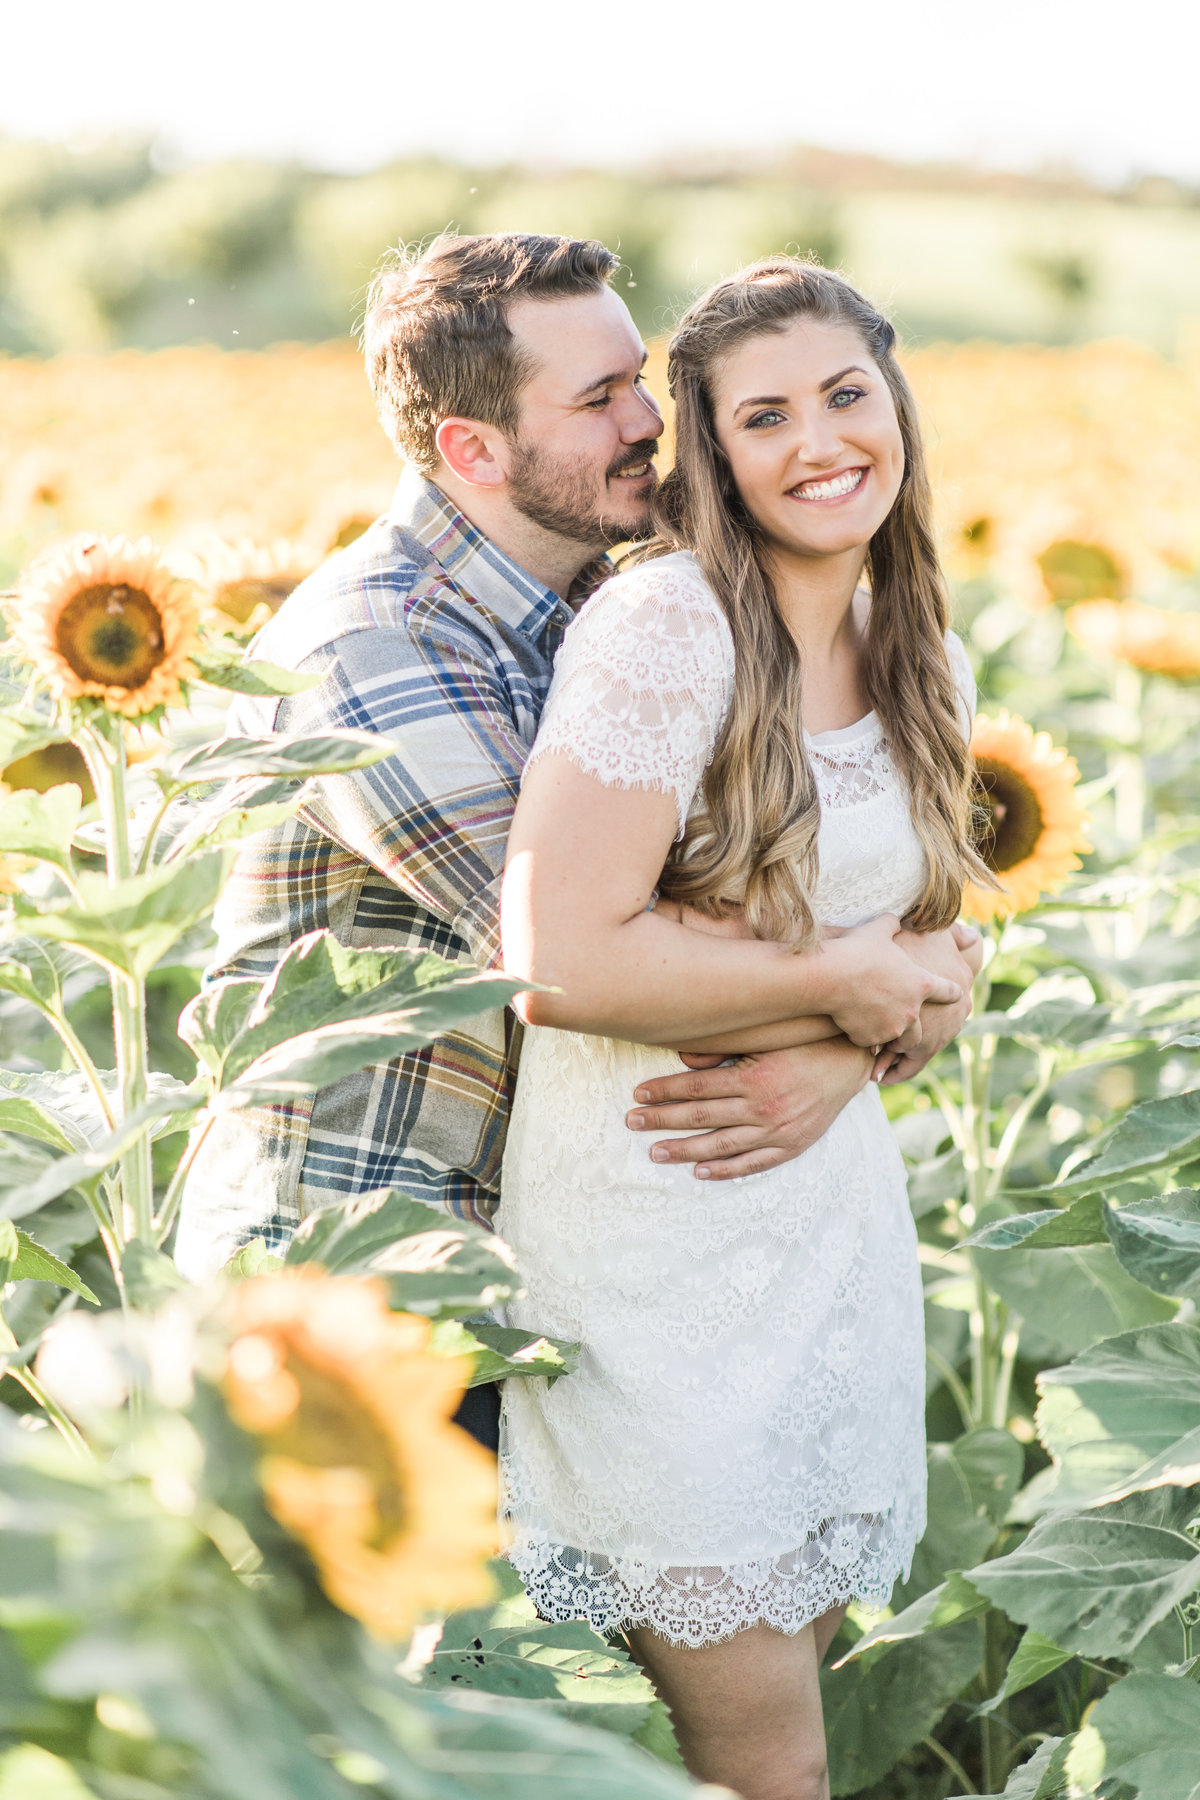 Couple embraces in a sunflower field.